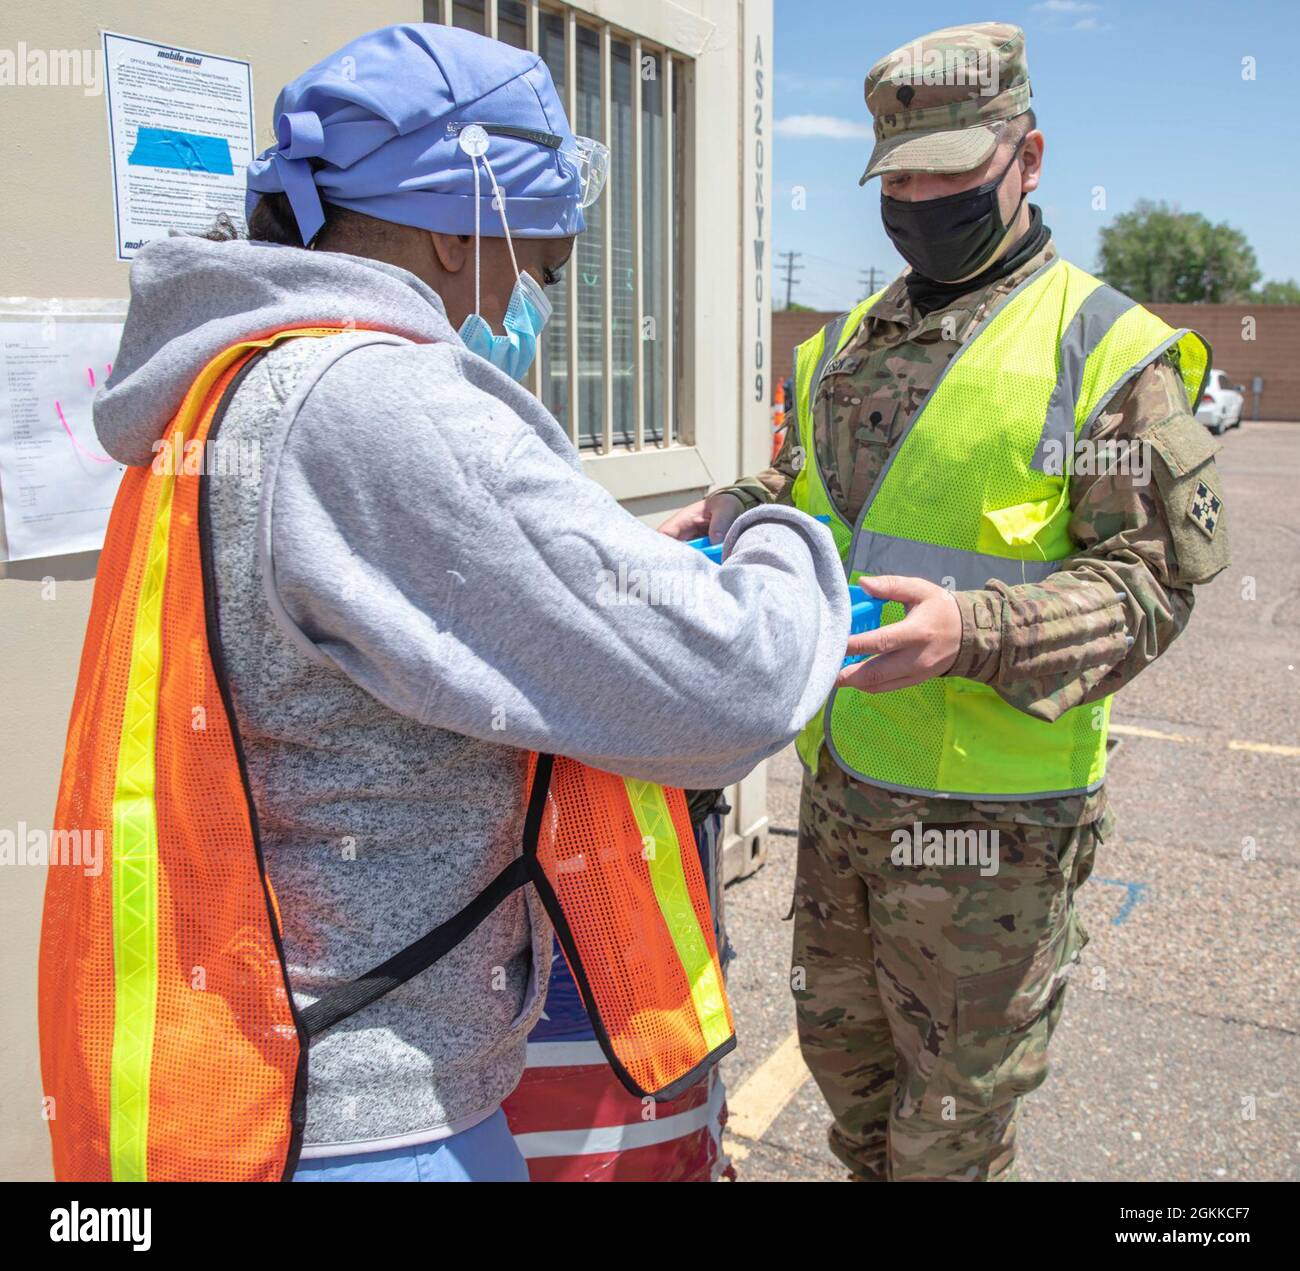 A civilian nurse, left, receives vaccines from U.S. Army Spc. Jacob Hospon, right, a combat medic assigned to 2nd Battalion, 12th Infantry Regiment, 2nd Stryker Brigade Combat Team, 4th Infantry Regiment, at the Community Vaccination Center at the Colorado State Fairgrounds in Pueblo, Colorado, May 15, 2021. The Soldiers deployed from Fort Carson, Colorado, to administer vaccinations to members of the Pueblo community and surrounding areas. U.S. Northern Command, through U.S. Army North, remains committed to providing continued, flexible Department of Defense support to the Federal Emergency M Stock Photo